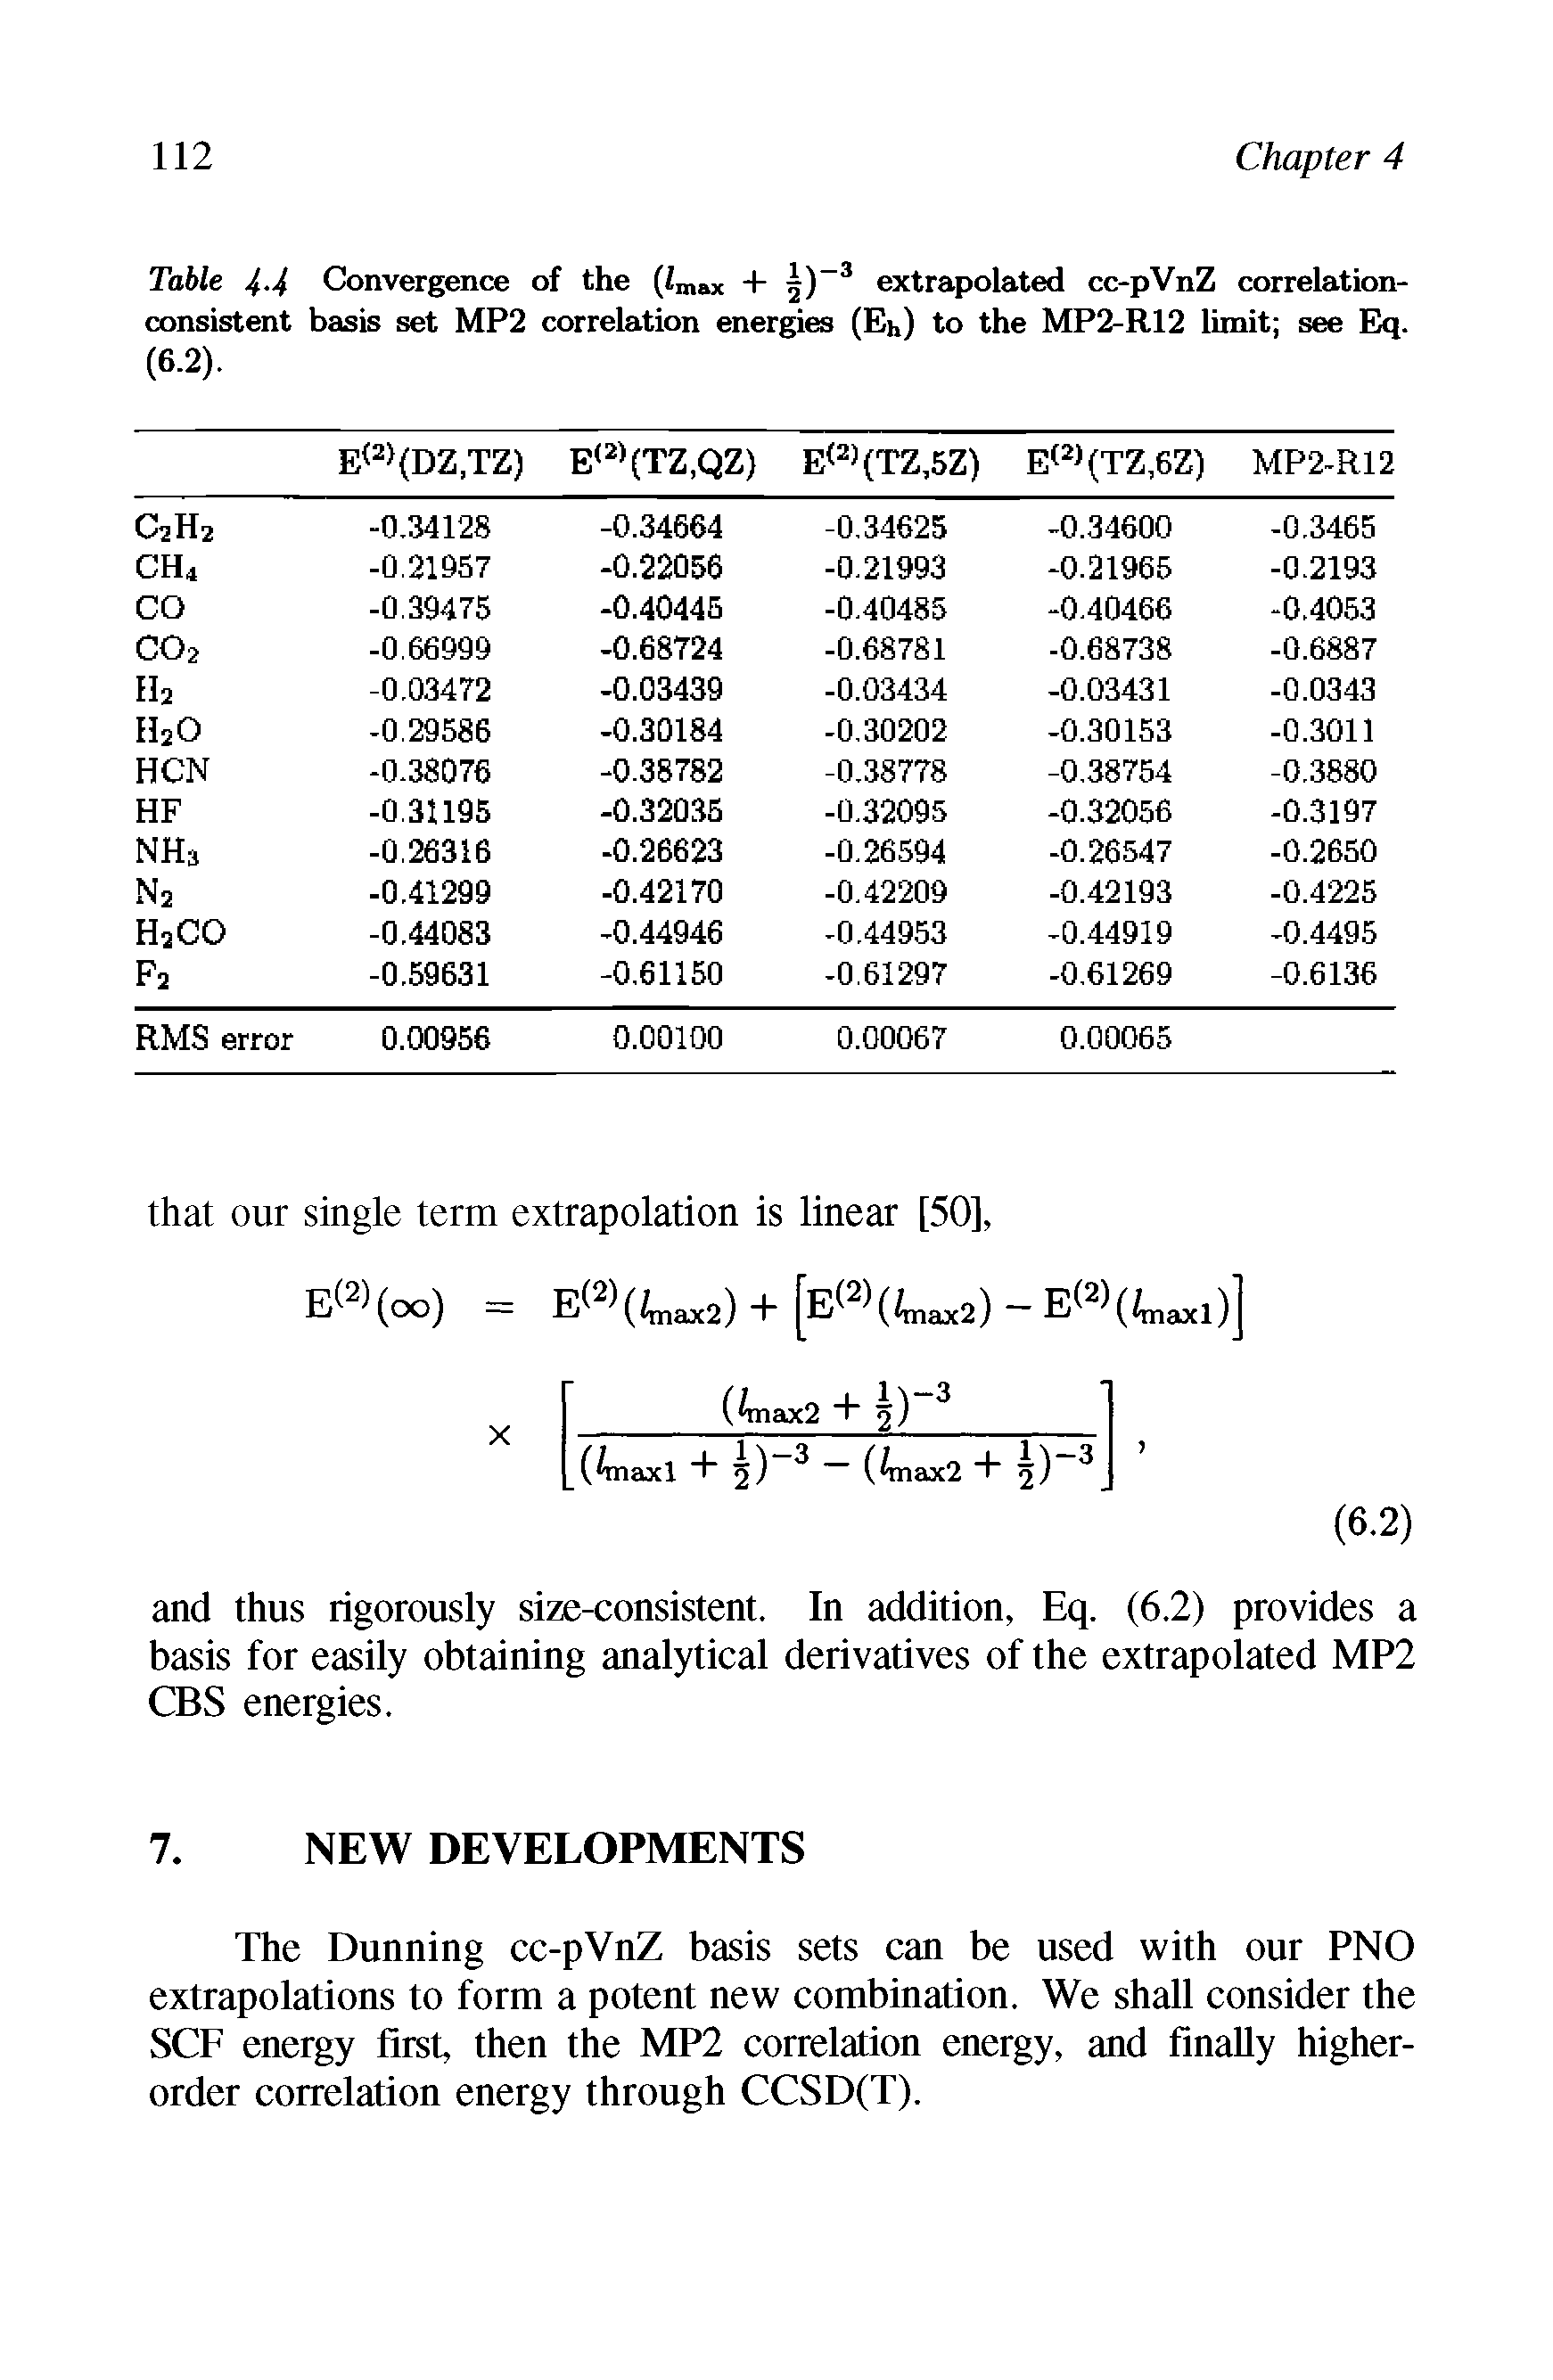 Table 4-4 Convergence of the (Zmax + 5) 3 extrapolated cc-pVnZ correlation-consistent basis set MP2 correlation energies (Eh) to the MP2-R12 limit see Eq. (6.2).